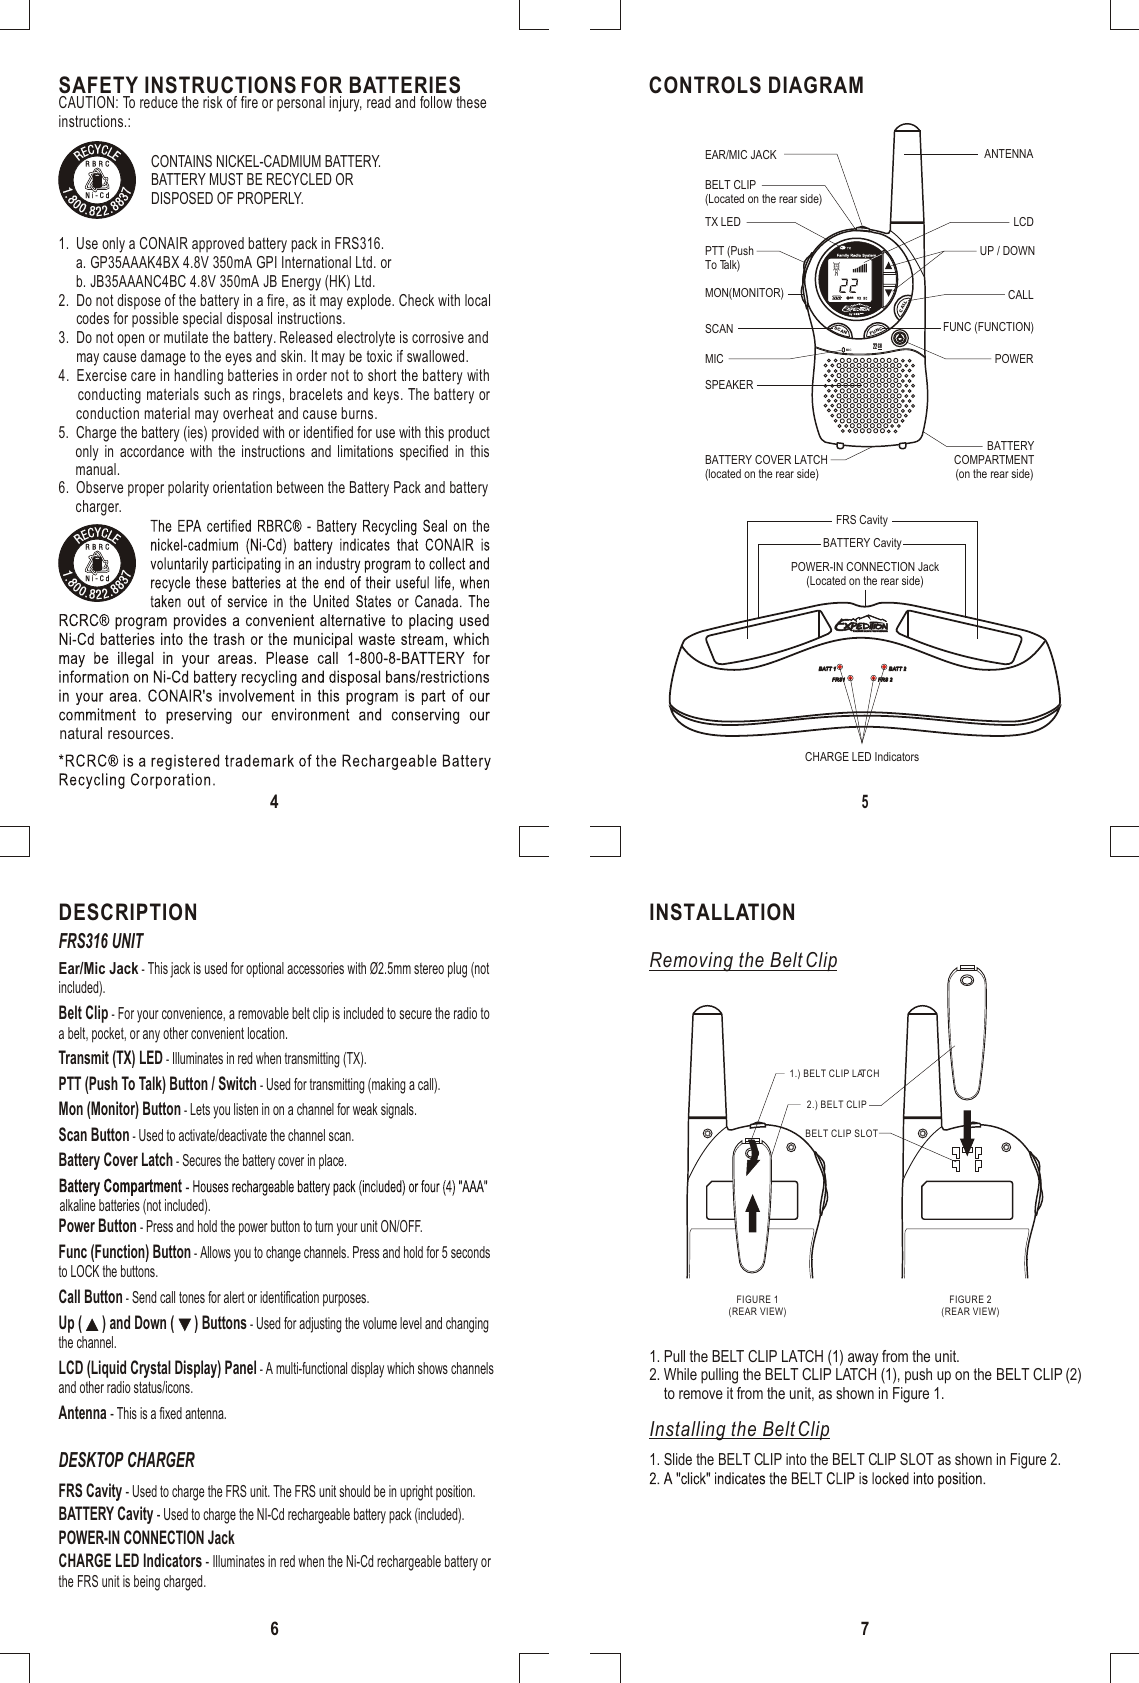 SCANFUNCCALLCH22MICINSTALLATIONRemoving the Belt ClipInstalling the Belt Clip1.) BELT CLIP LATCHFIGURE 1(REAR VIEW)FIGURE 2(REAR VIEW)BELT CLIP SLOT2.) BELT CLIP1. Pull the BELT CLIP LATCH (1) away from the unit.2. While pulling the BELT CLIP LATCH (1), push up on the BELT CLIP (2)    to remove it from the unit, as shown in Figure 1. 1. Slide the BELT CLIP into the BELT CLIP SLOT as shown in Figure 2.BATT 1BATT 1 BATT 2BATT 2FRS1FRS1 FRS 2FRS 2MAXIMUM RANGE PERFORMANCEMAXIMUM RANGE PERFORMANCESAFETY INSTRUCTIONS FOR BATTERIESCONTAINS NICKEL-CADMIUM BATTERY.BATTERY MUST BE RECYCLED ORDISPOSED OF PROPERLY. CAUTION: To reduce the risk of fire or personal injury, read and follow theseinstructions.:1.  Use only a CONAIR approved battery pack in FRS316.     a. GP35AAAK4BX 4.8V 350mA GPI International Ltd. or     b. JB35AAANC4BC 4.8V 350mA JB Energy (HK) Ltd.2.  Do not dispose of the battery in a fire, as it may explode. Check with local     codes for possible special disposal instructions.3.  Do not open or mutilate the battery. Released electrolyte is corrosive and     may cause damage to the eyes and skin. It may be toxic if swallowed.4.  Exercise care in handling batteries in order not to short the battery with     conducting materials such as rings, bracelets and keys. The battery or     conduction material may overheat and cause burns.5.  Charge the battery (ies) provided with or identified for use with this product   only in accordance with the instructions and limitations specified in this         manual.6.  Observe proper polarity orientation between the Battery Pack and battery     charger.natural resources.CONTROLS DIAGRAMCHARGE LED IndicatorsBATTERY CavityFRS CavityPOWER-IN CONNECTION Jack(Located on the rear side)FRS Cavity - Used to charge the FRS unit. The FRS unit should be in upright position.BATTERY Cavity - Used to charge the NI-Cd rechargeable battery pack (included).POWER-IN CONNECTION Jack CHARGE LED Indicators - Illuminates in red when the Ni-Cd rechargeable battery orthe FRS unit is being charged.DESKTOP CHARGERFRS316 UNITDESCRIPTION7456BELT CLIP(Located on the rear side)FUNC (FUNCTION)POWERPTT (PushTo Talk)CALLUP / DOWNSPEAKERBATTERY COVER LATCH(located on the rear side)MICSCANMON(MONITOR)LCDANTENNABATTERYCOMPARTMENT(on the rear side)TX LEDEAR/MIC JACKBelt Clip - For your convenience, a removable belt clip is included to secure the radio toa belt, pocket, or any other convenient location.Power Button - Press and hold the power button to turn your unit ON/OFF.Transmit (TX) LED - Illuminates in red when transmitting (TX).PTT (Push To Talk) Button / Switch - Used for transmitting (making a call).Mon (Monitor) Button - Lets you listen in on a channel for weak signals.Func (Function) Button - Allows you to change channels. Press and hold for 5 secondsto LOCK the buttons.Battery Cover Latch - Secures the battery cover in place.alkaline batteries (not included).Scan Button - Used to activate/deactivate the channel scan.LCD (Liquid Crystal Display) Panel - A multi-functional display which shows channelsand other radio status/icons.Antenna - This is a fixed antenna.Call Button - Send call tones for alert or identification purposes.Up (      ) and Down (      ) Buttons - Used for adjusting the volume level and changingthe channel.Ear/Mic Jack - This jack is used for optional accessories with Ø2.5mm stereo plug (notincluded).